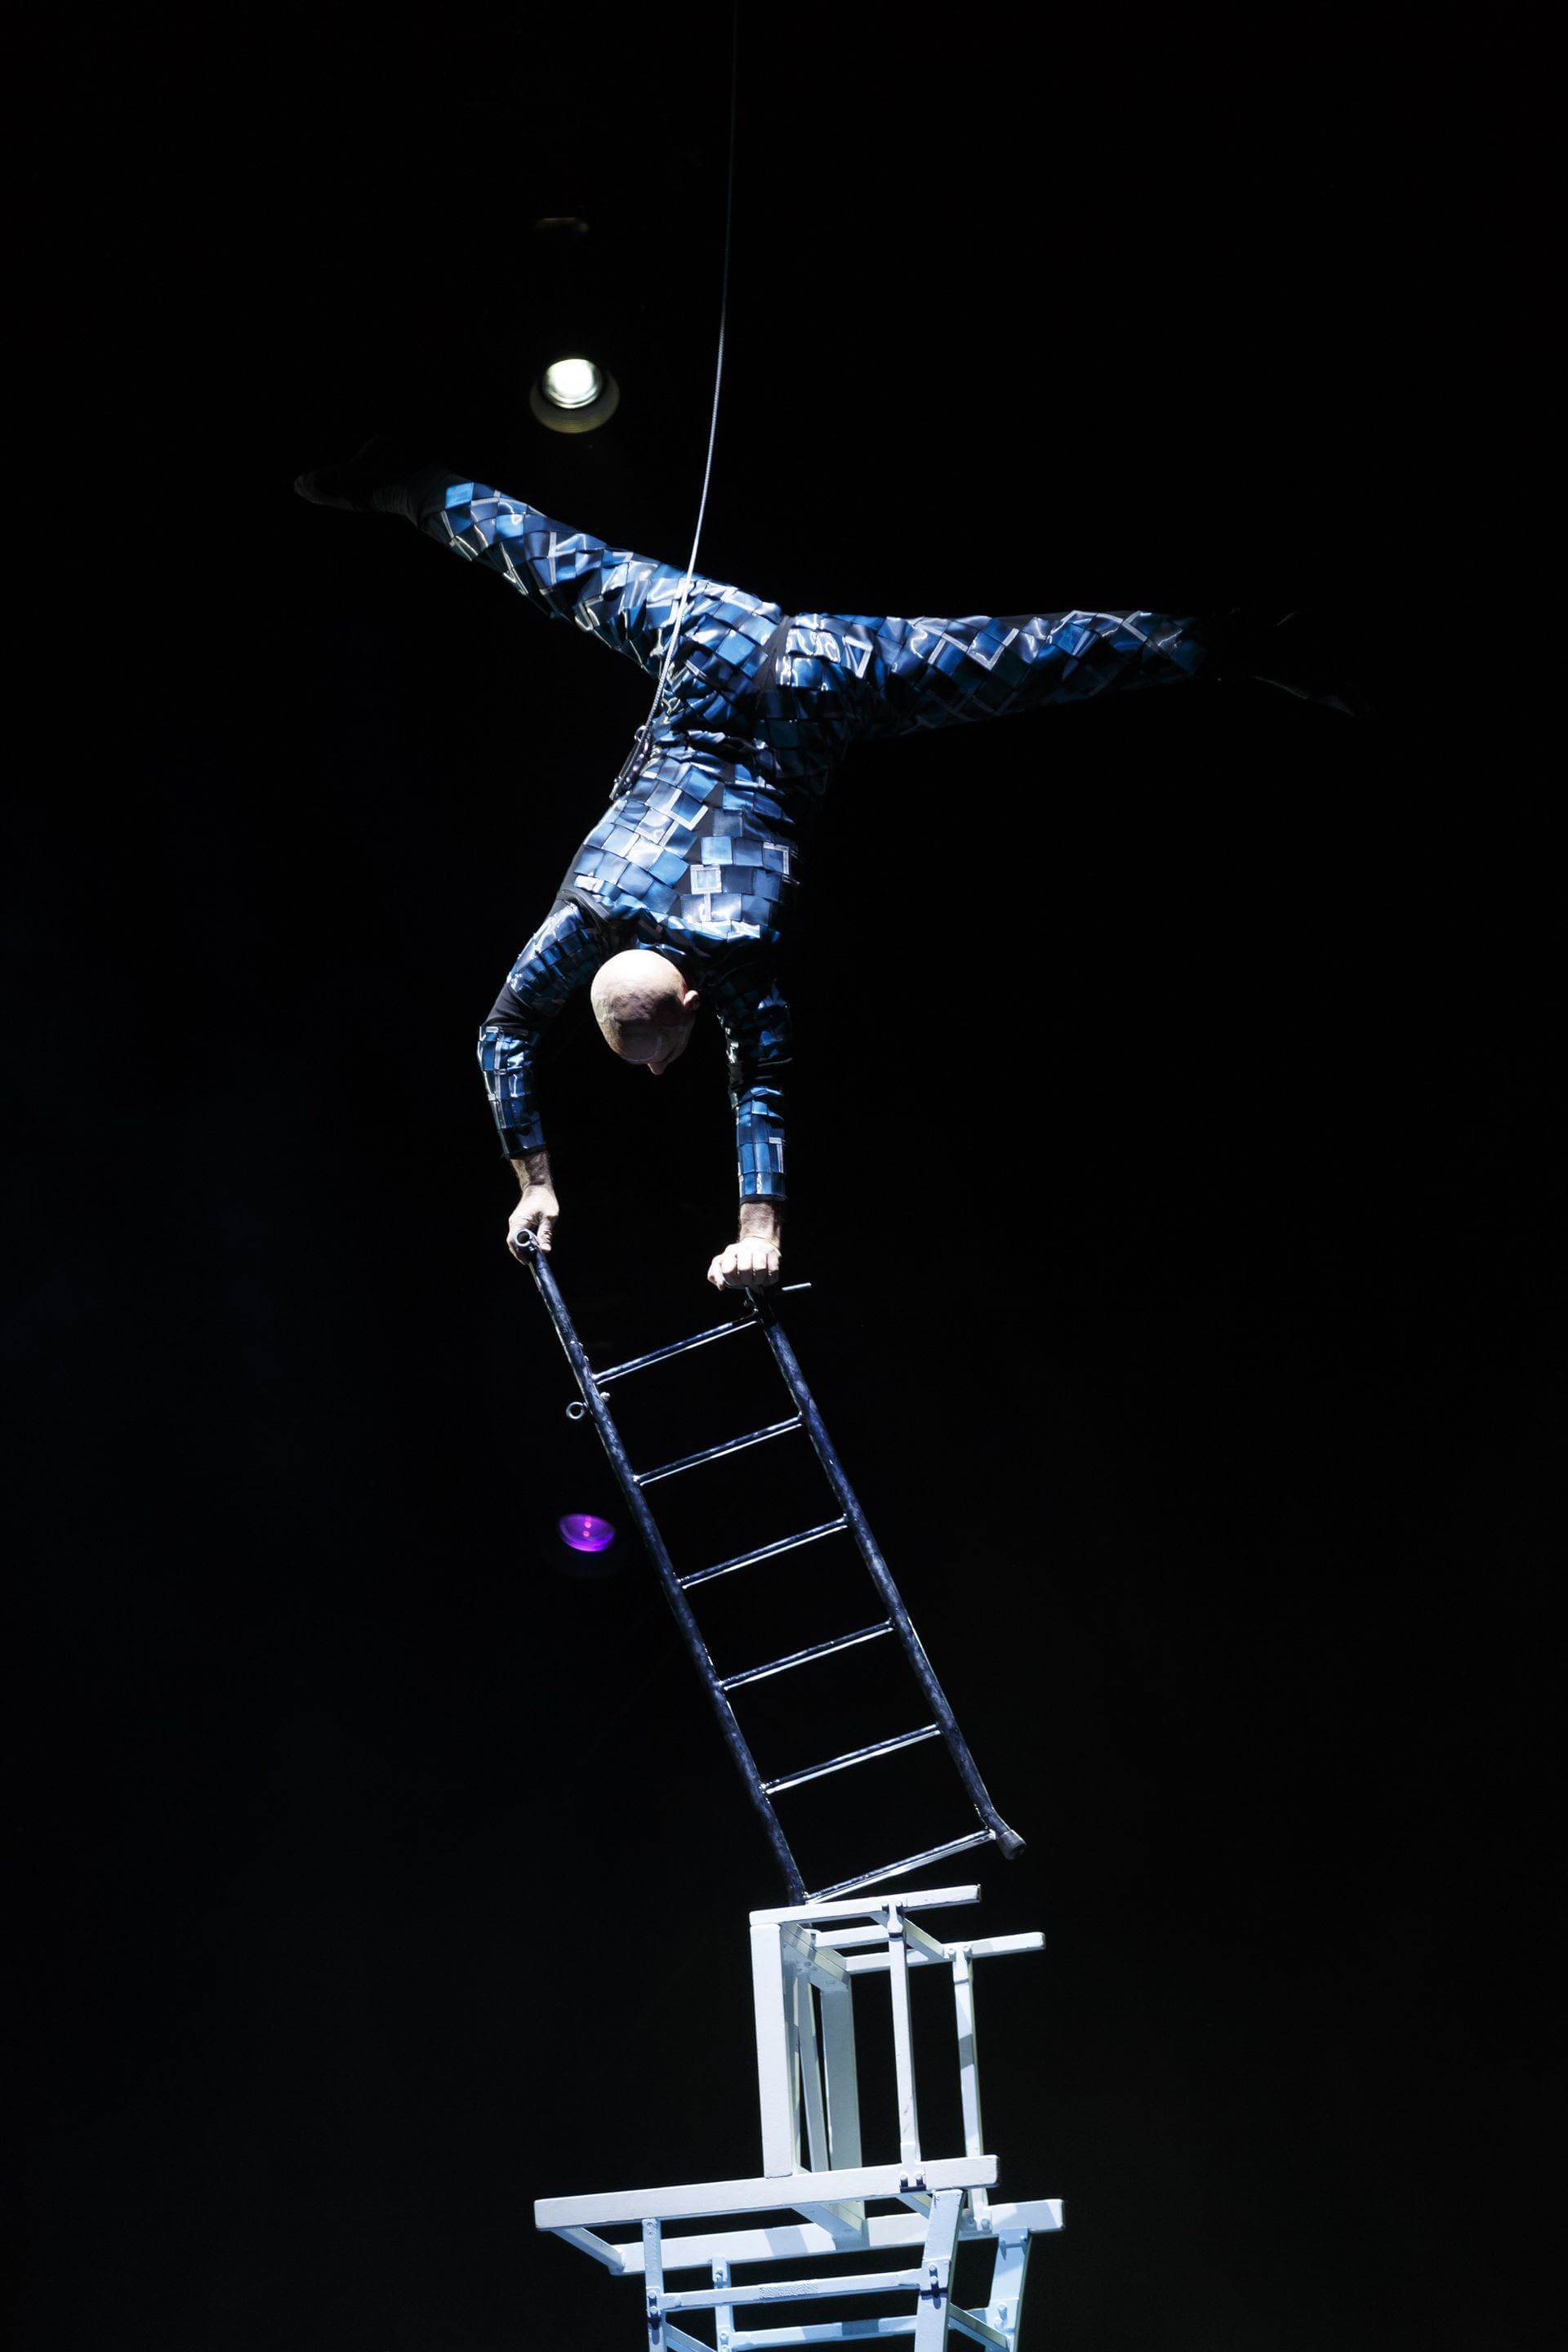 Scalada - Stelar by Cirque du Soleil 2017: Balancing act and tower of chairs